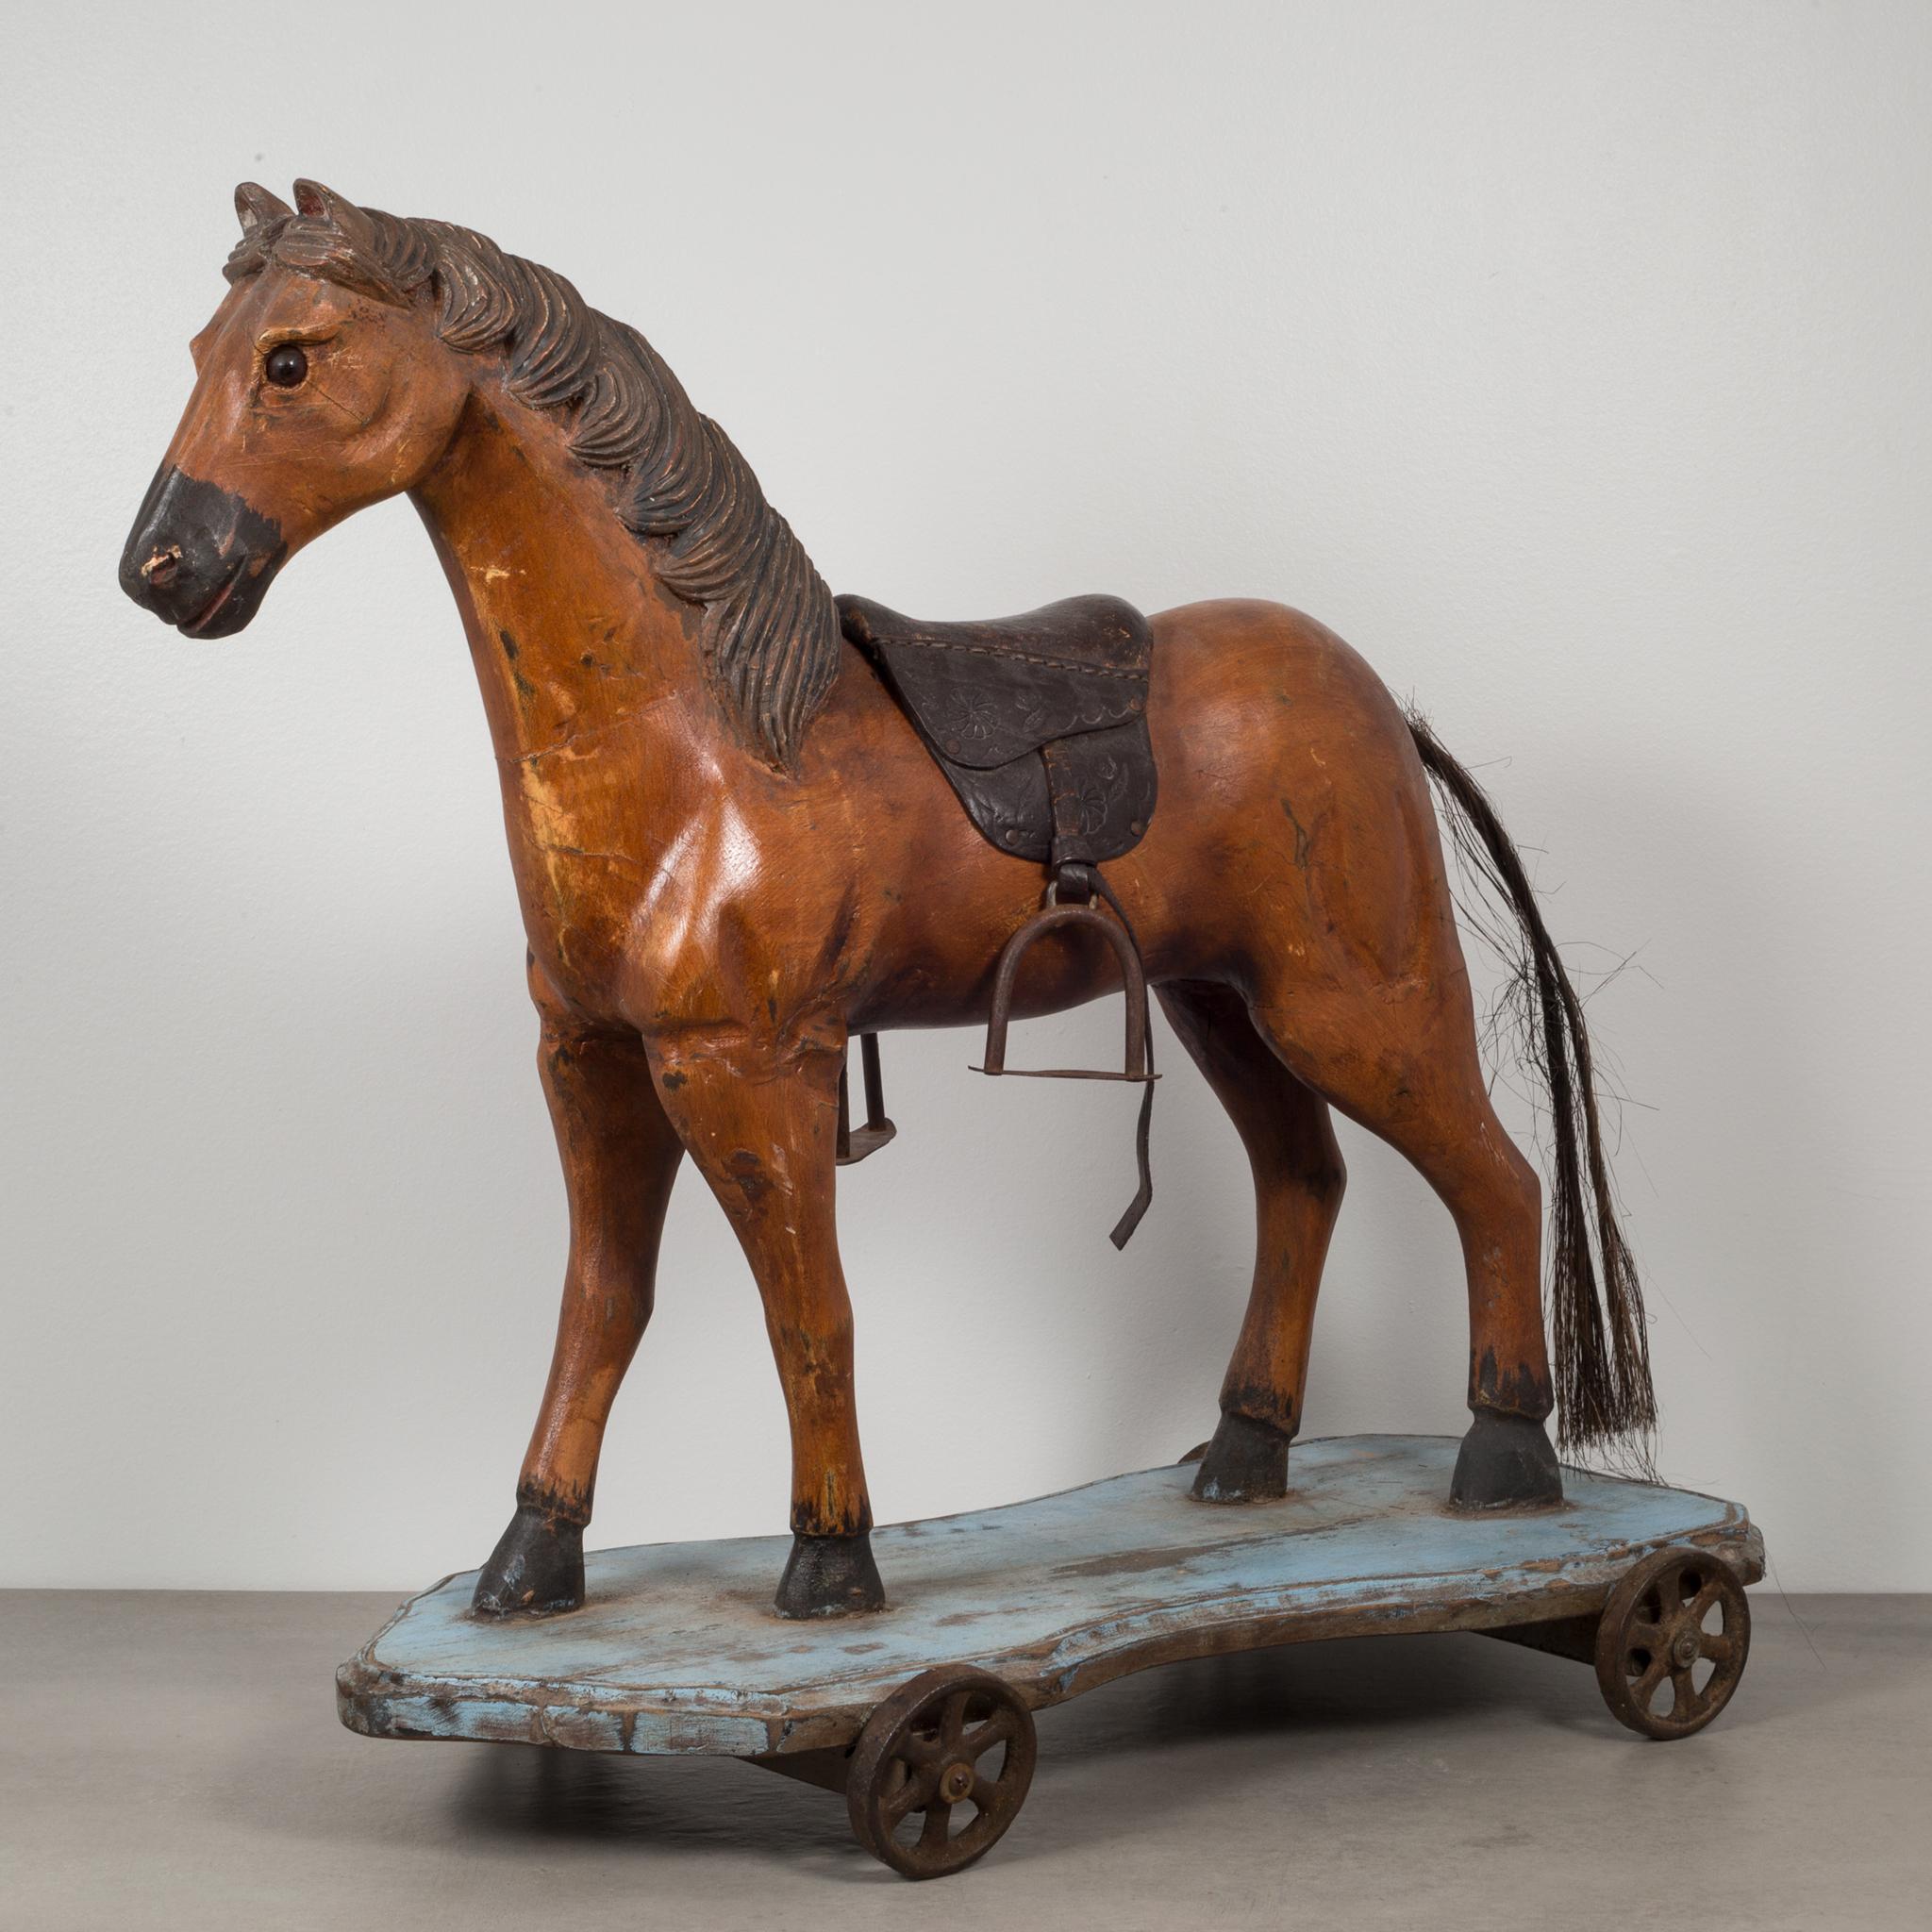 About

This is an original toy horse pull ride. This horse is hand carved wood with detailed mane, glass eyes and a horse hair tail. The saddle is embossed leather with metal stirrups. The horse stands firmly on a wooden plank with steel wheels.